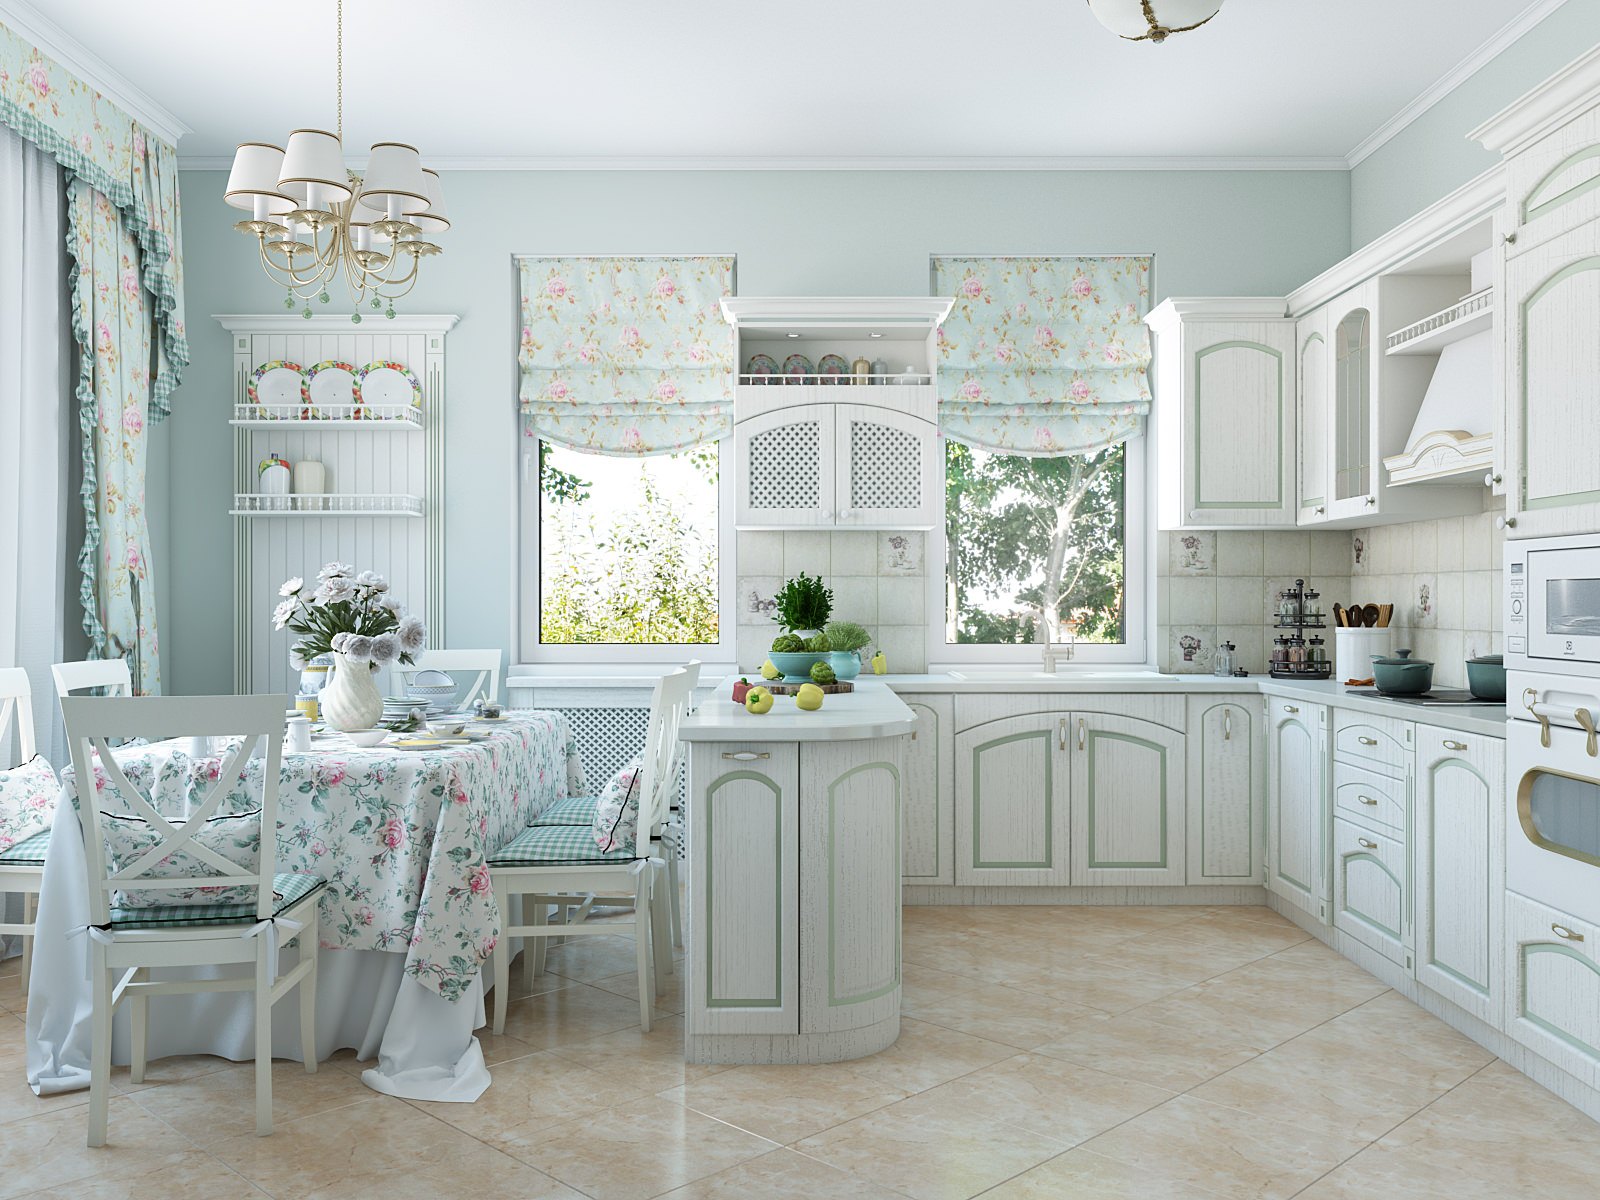 A small French country kitchen - pick white color